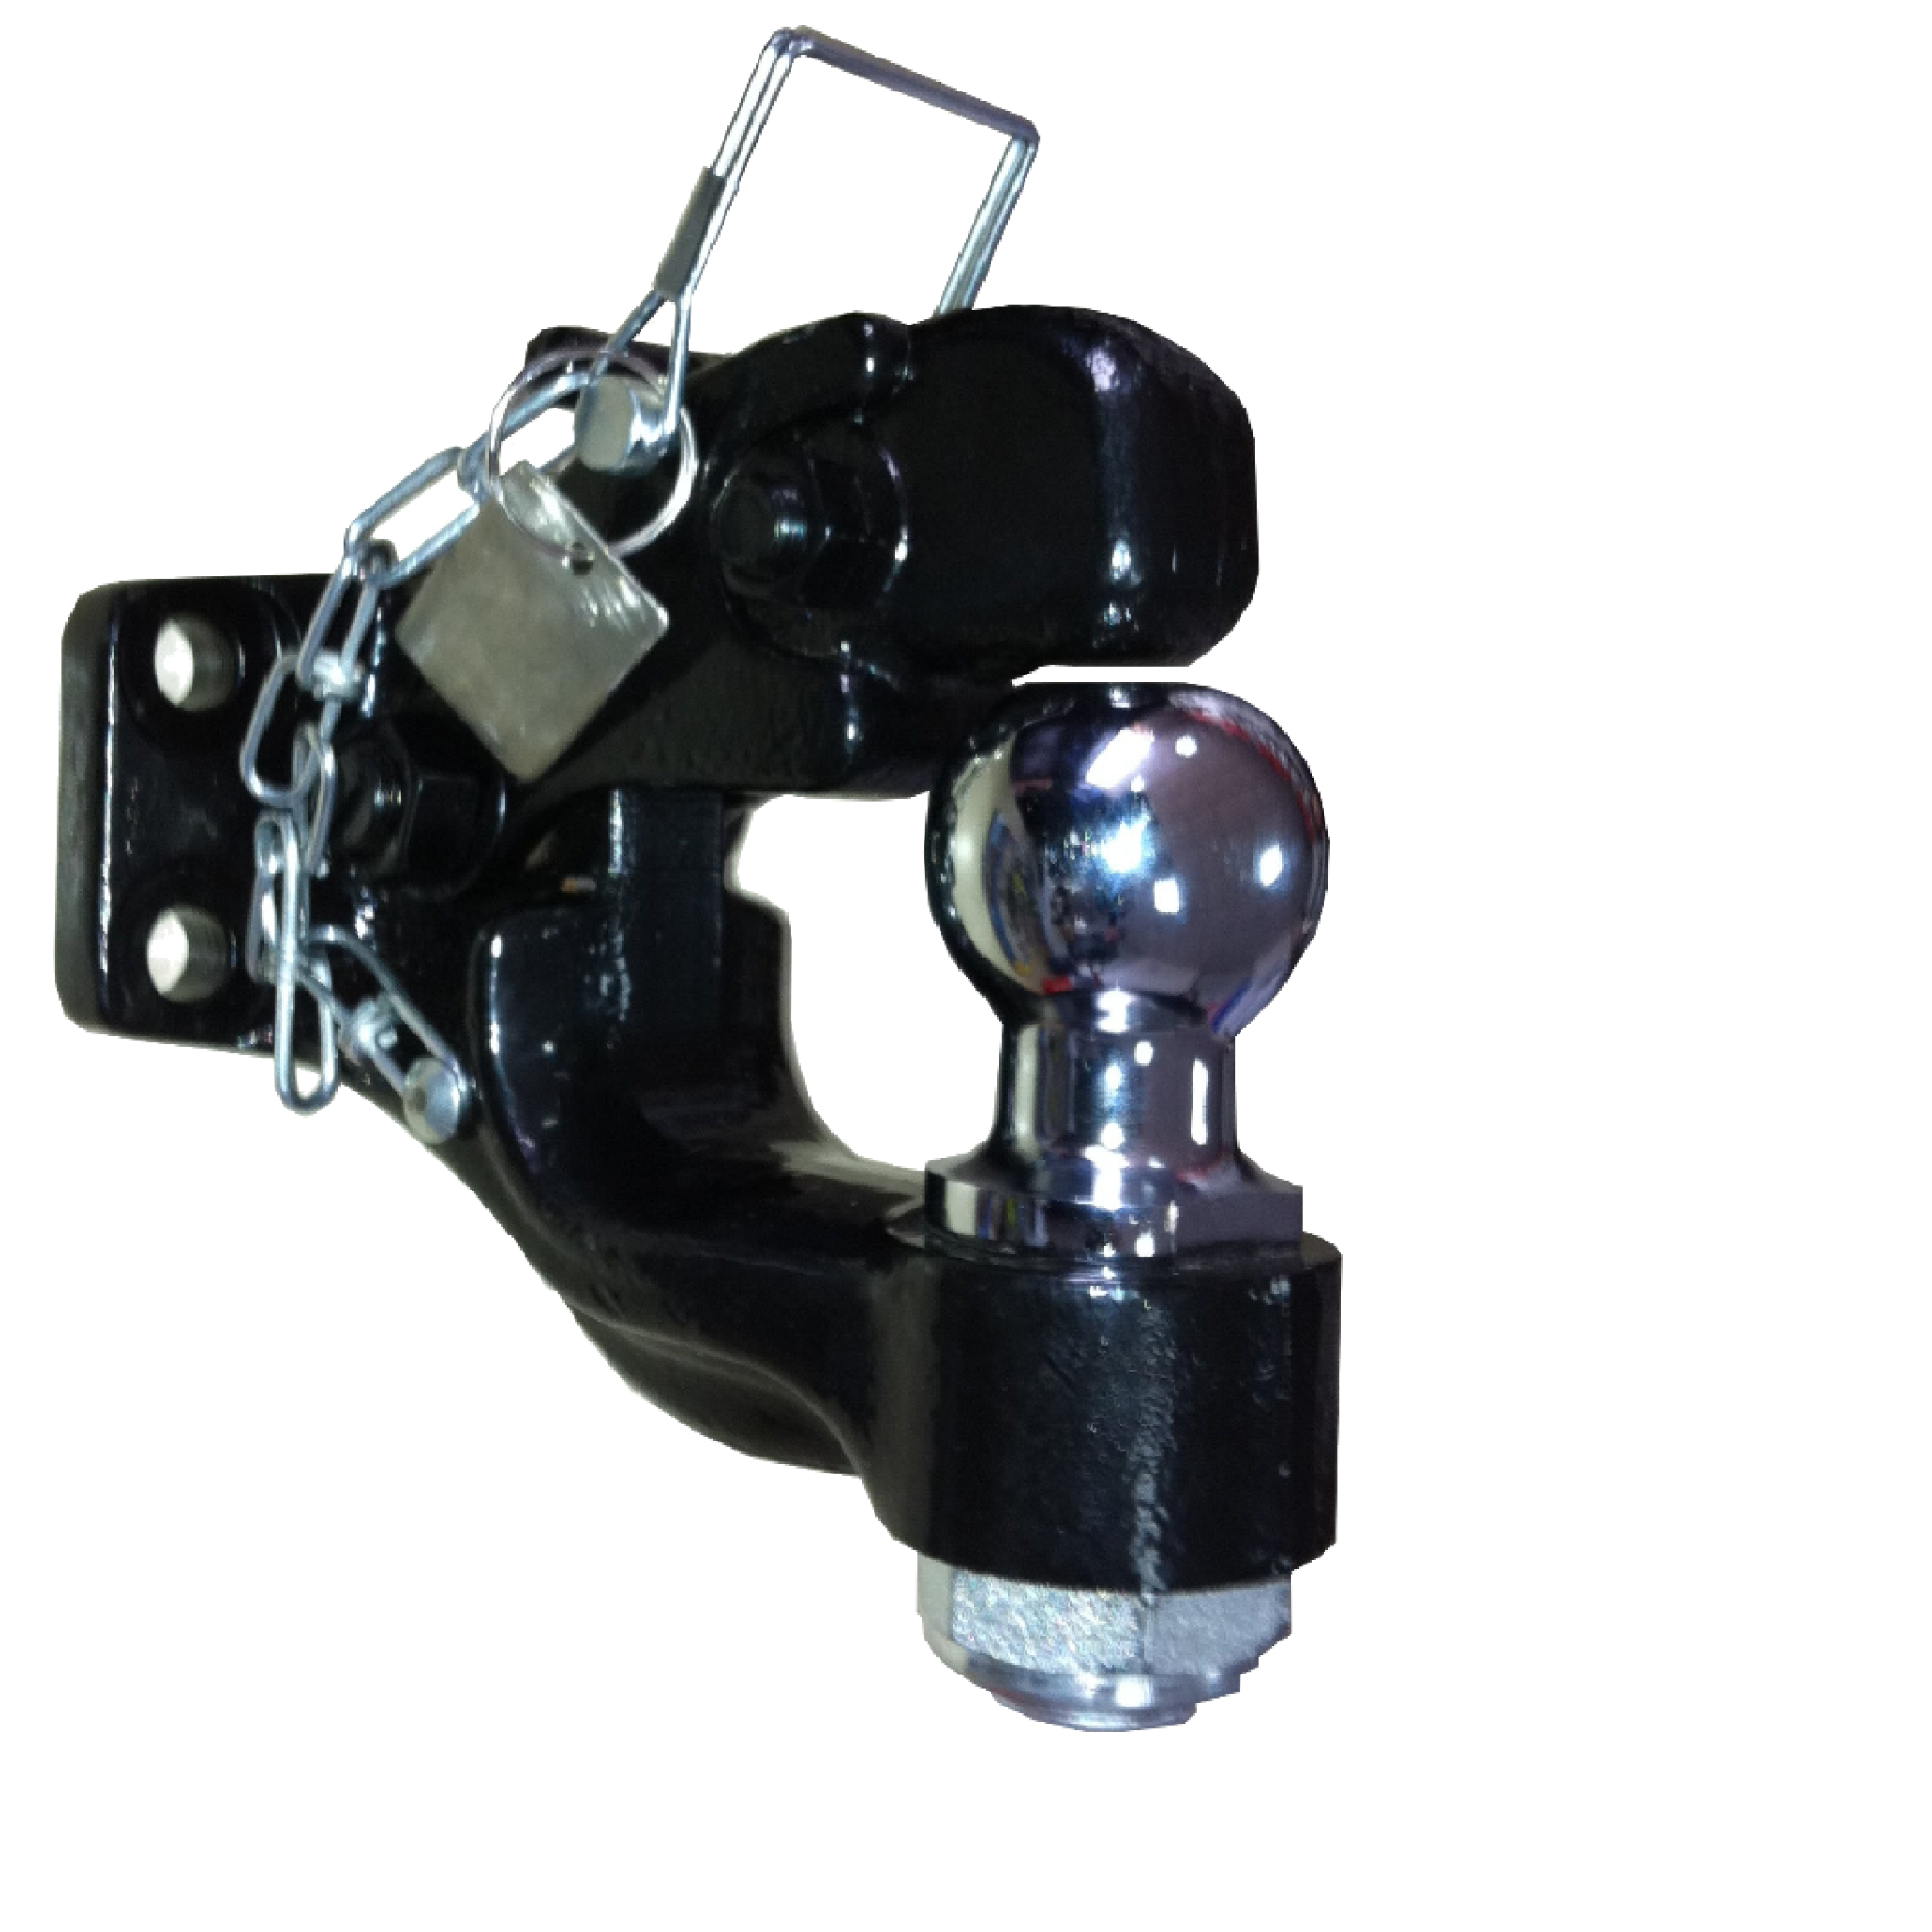 Pintle Hook and 50mm Towball Combo - 6 Tonne